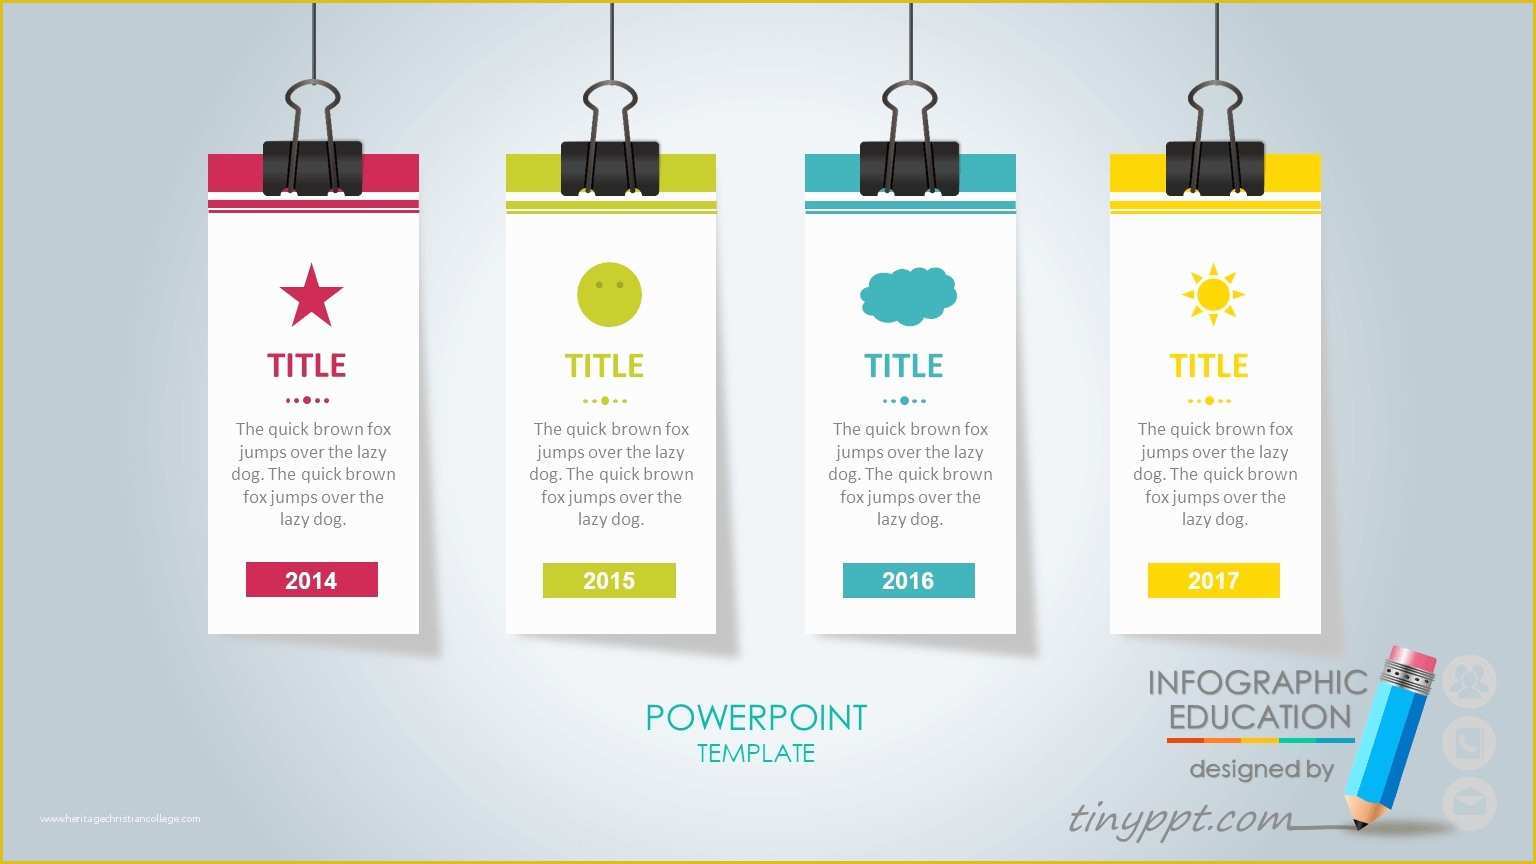 Powerpoint Templates Free Download 2016 Of Template Powerpoint Free Download 2016